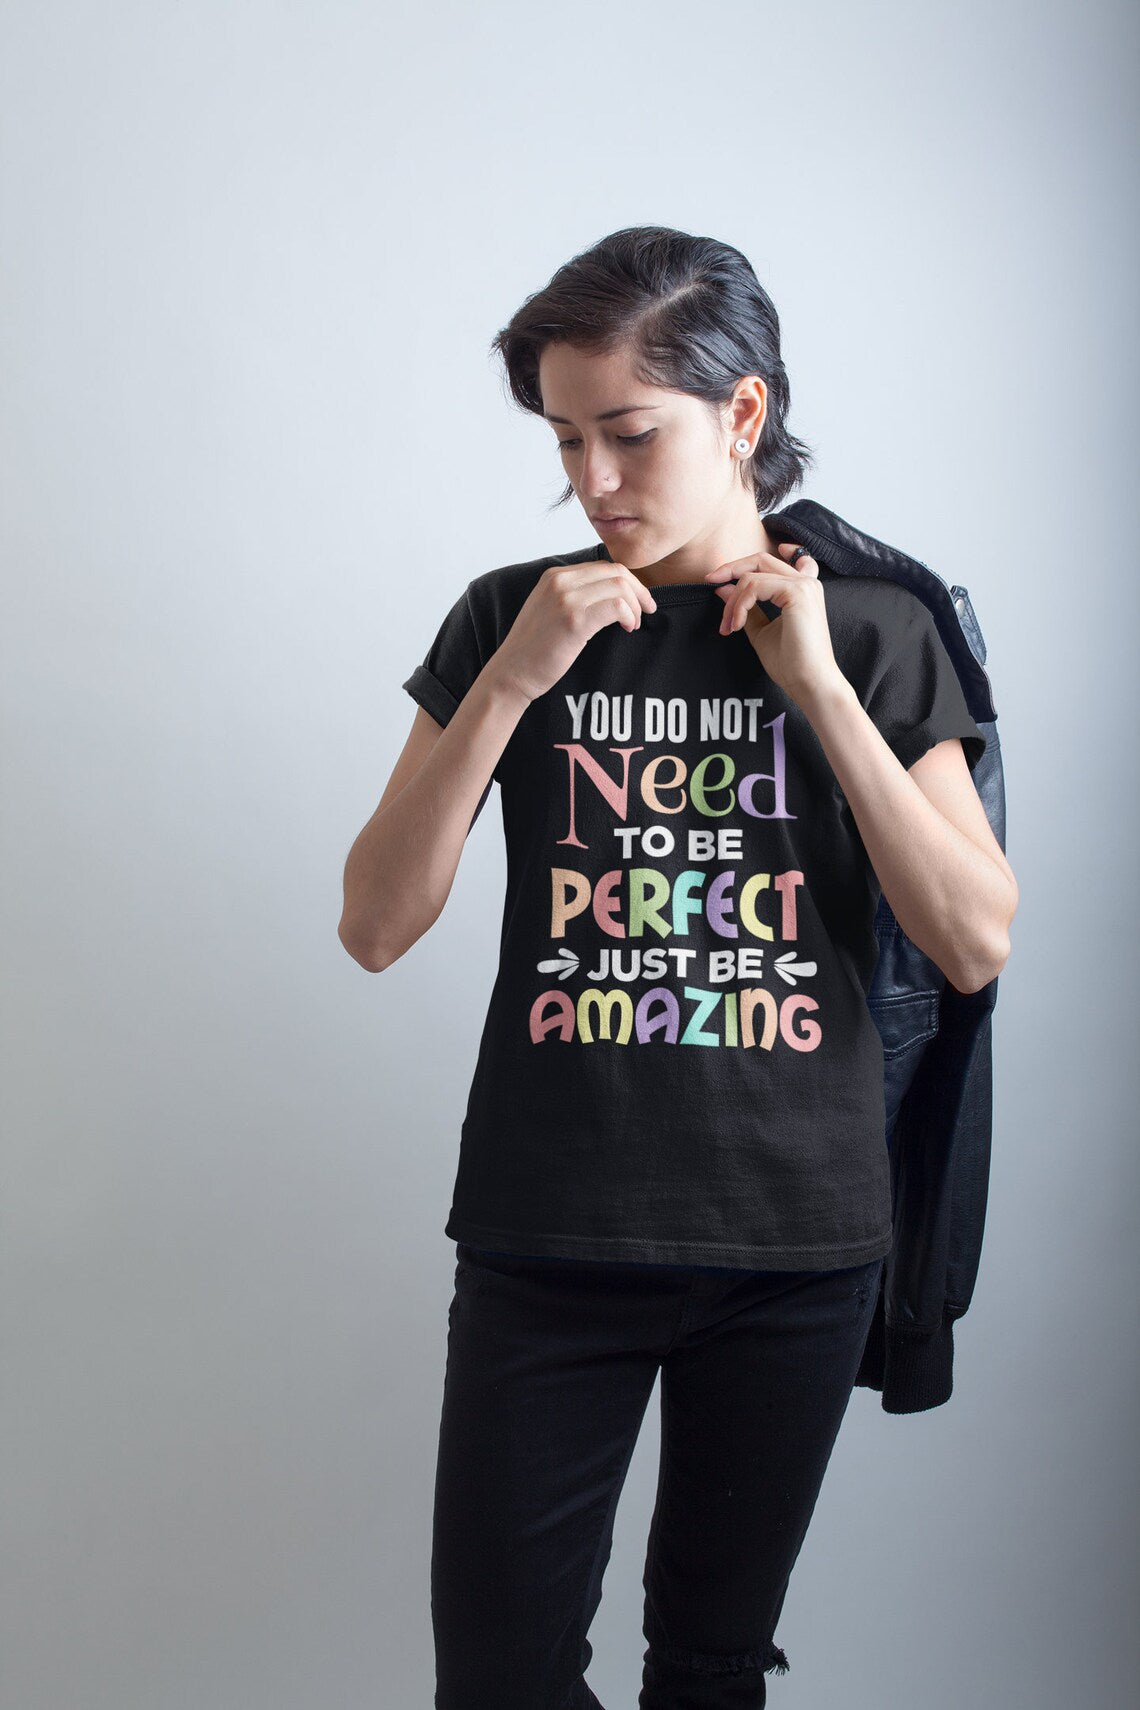 You Do Not Need To Be Perfect Just Be Amazing Women's Premium Tee, Amazing shirts, Inspirational shirts, Motivational Shirts, Trendy tees